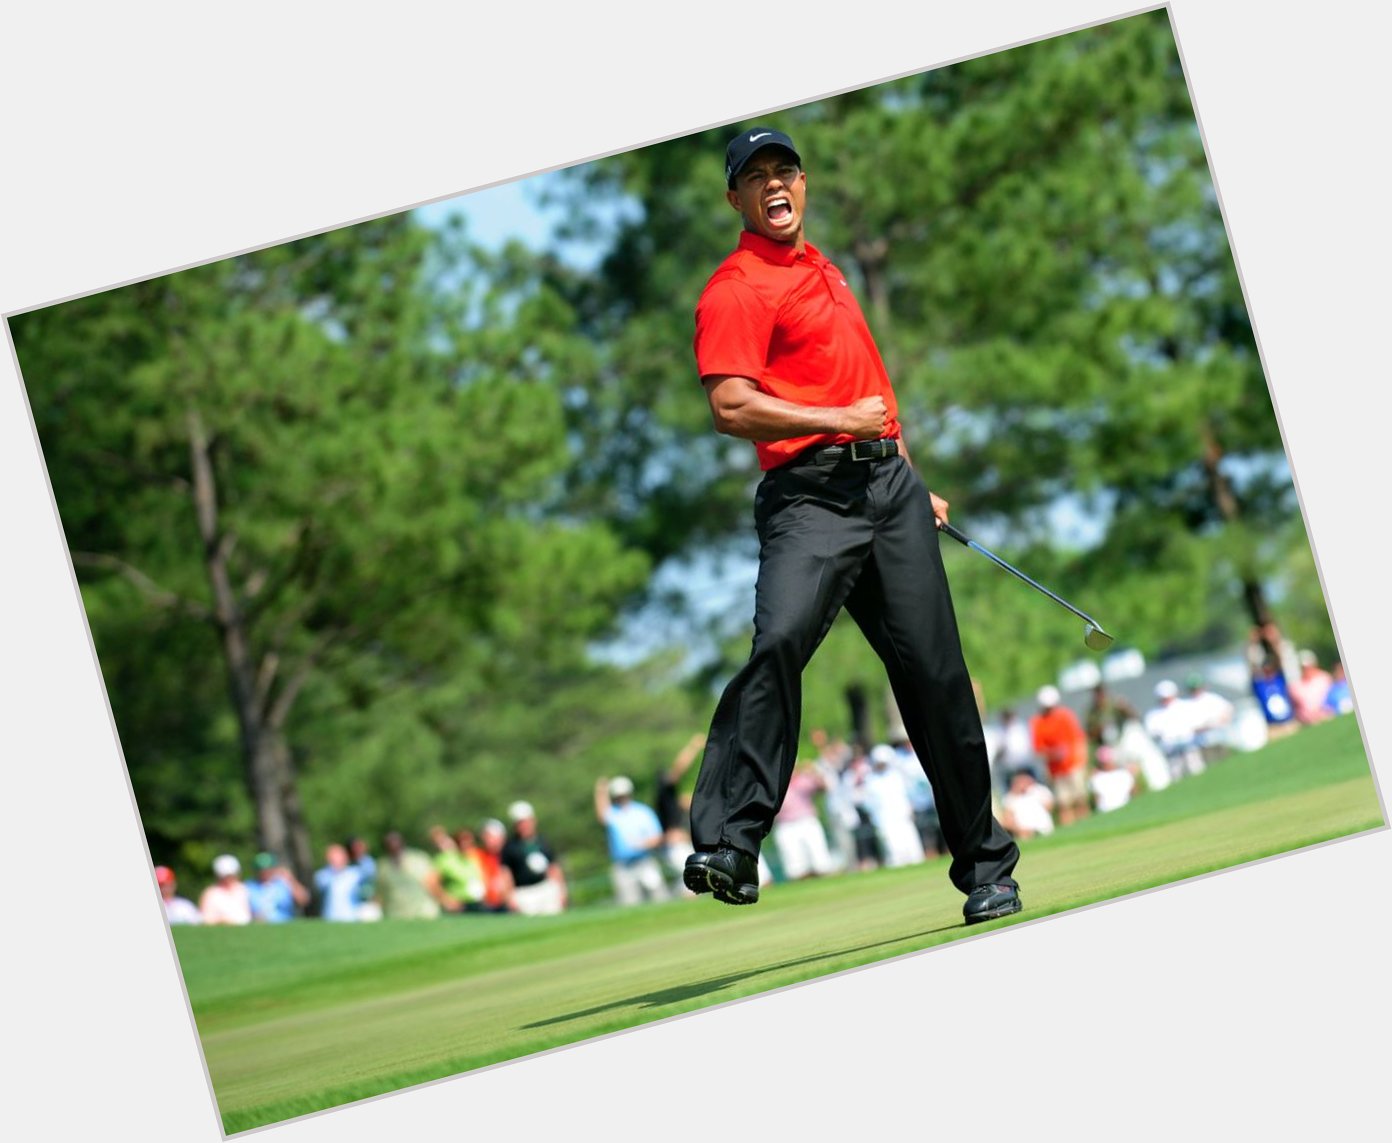 Happy 40th Birthday to See pics of the 4-time Masters champ in Augusta.  